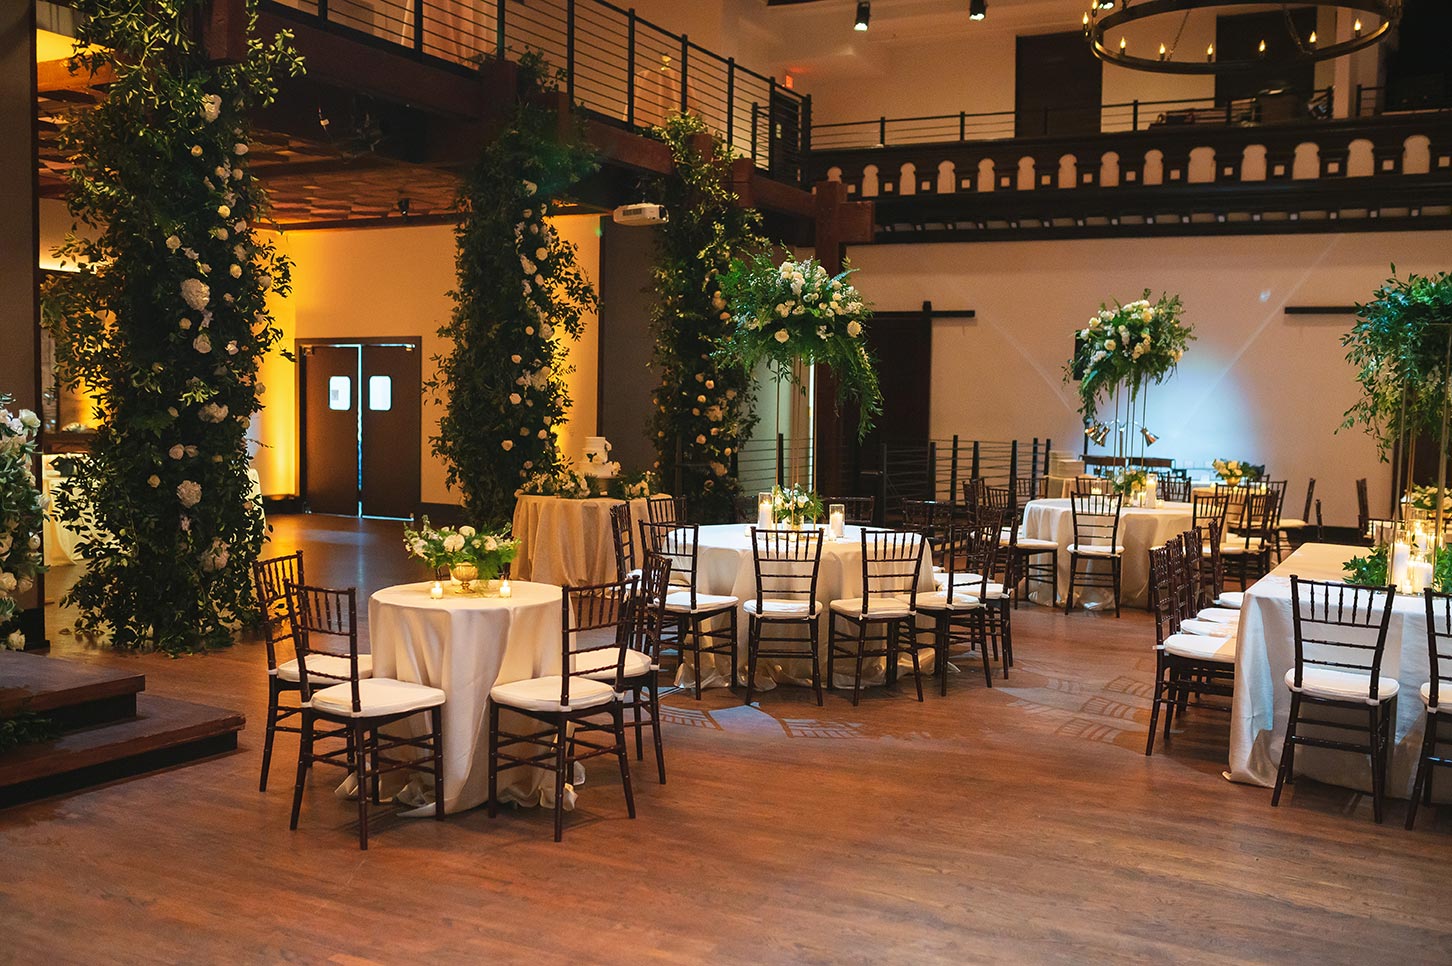 Wedding reception setup with abundant greenery wrapped around columns and tall, large arrangements as table centerpieces